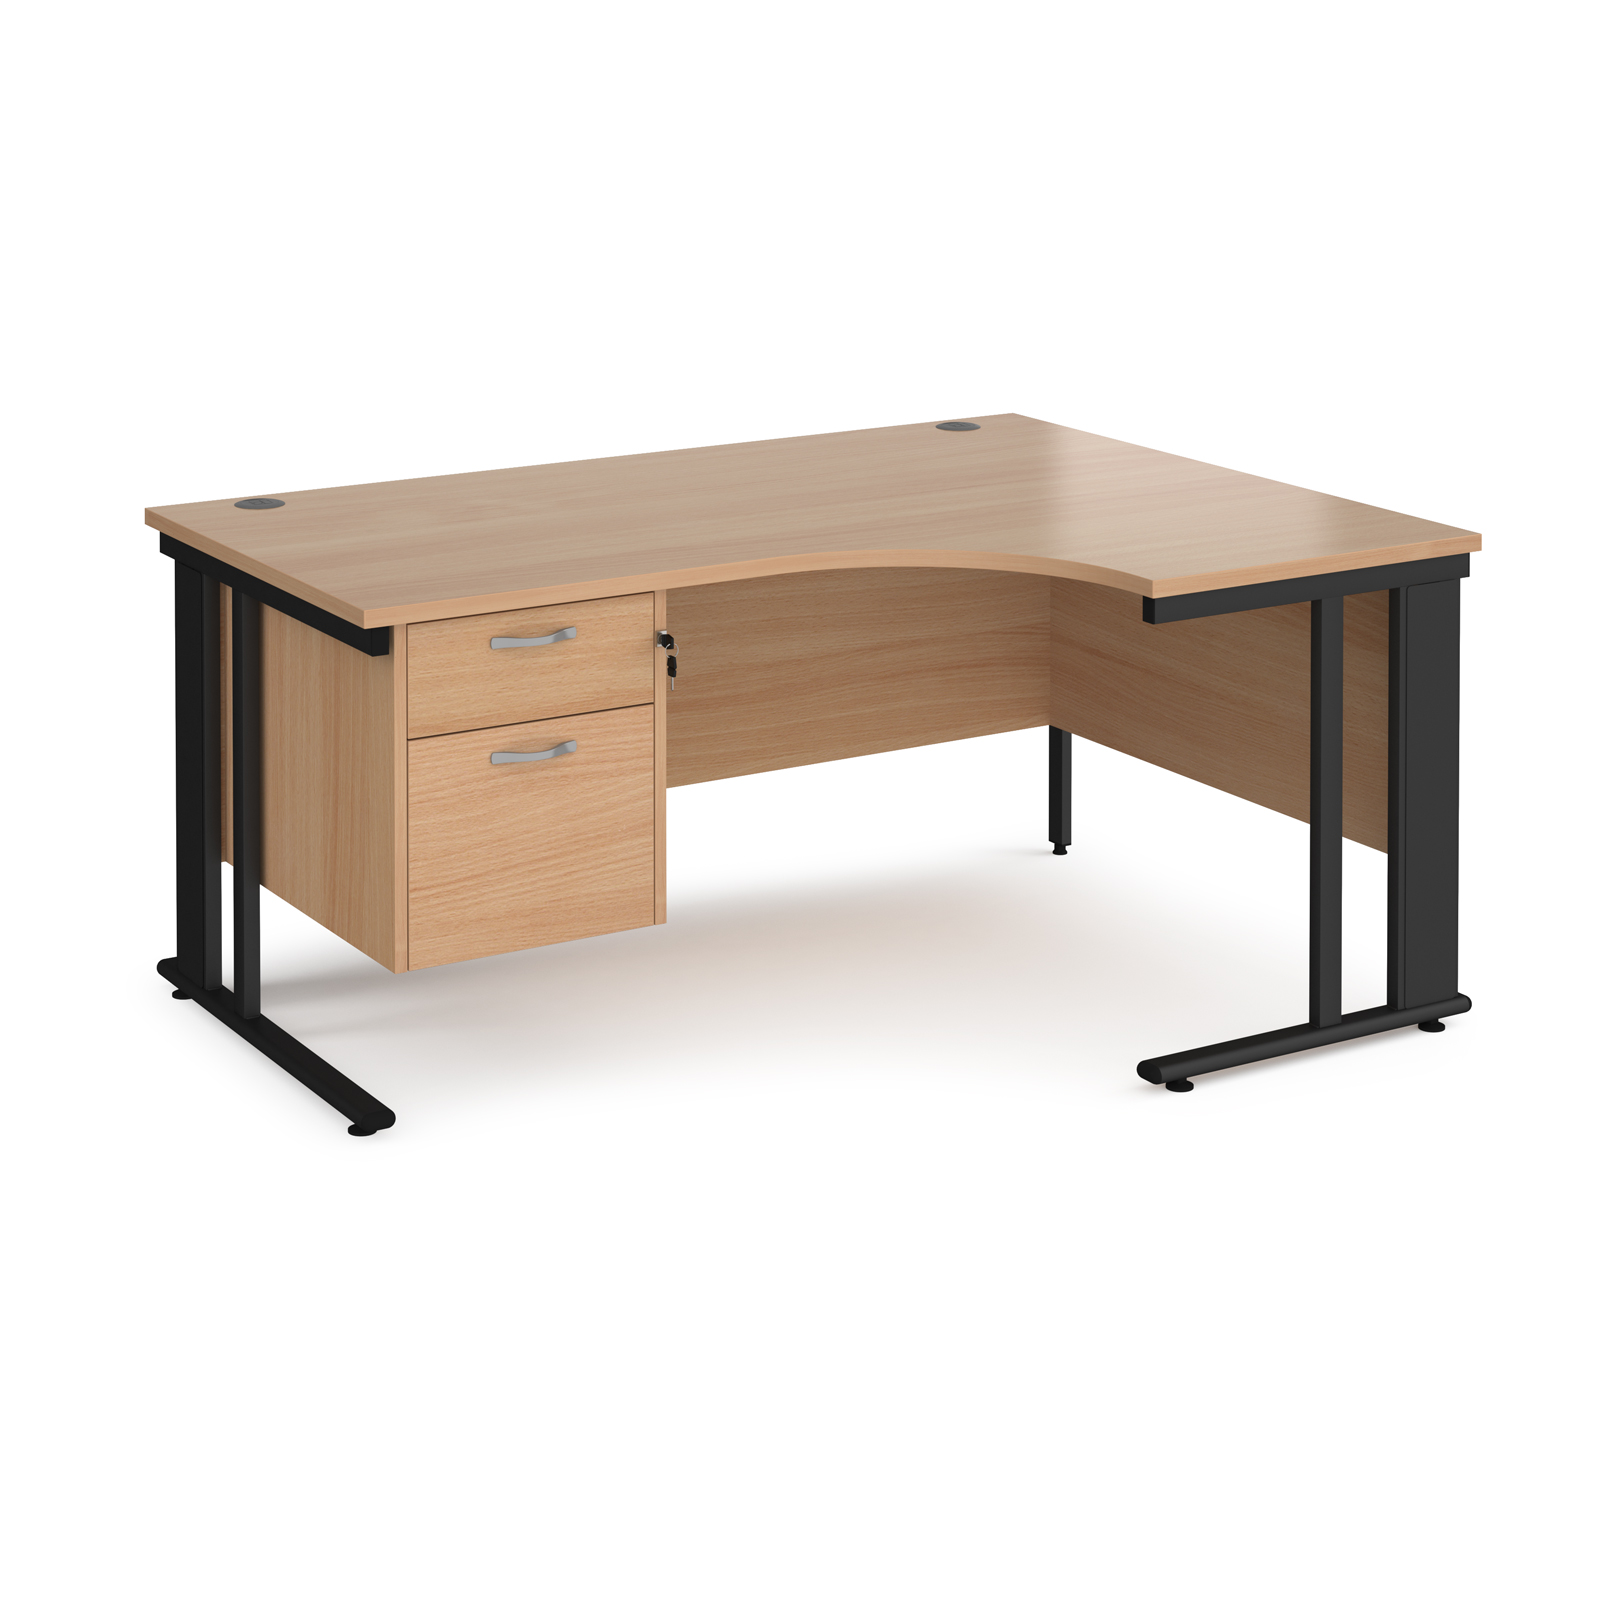 Maestro 25 right hand ergonomic desk 1600mm wide with 2 drawer pedestal - black cable managed leg frame, beech top